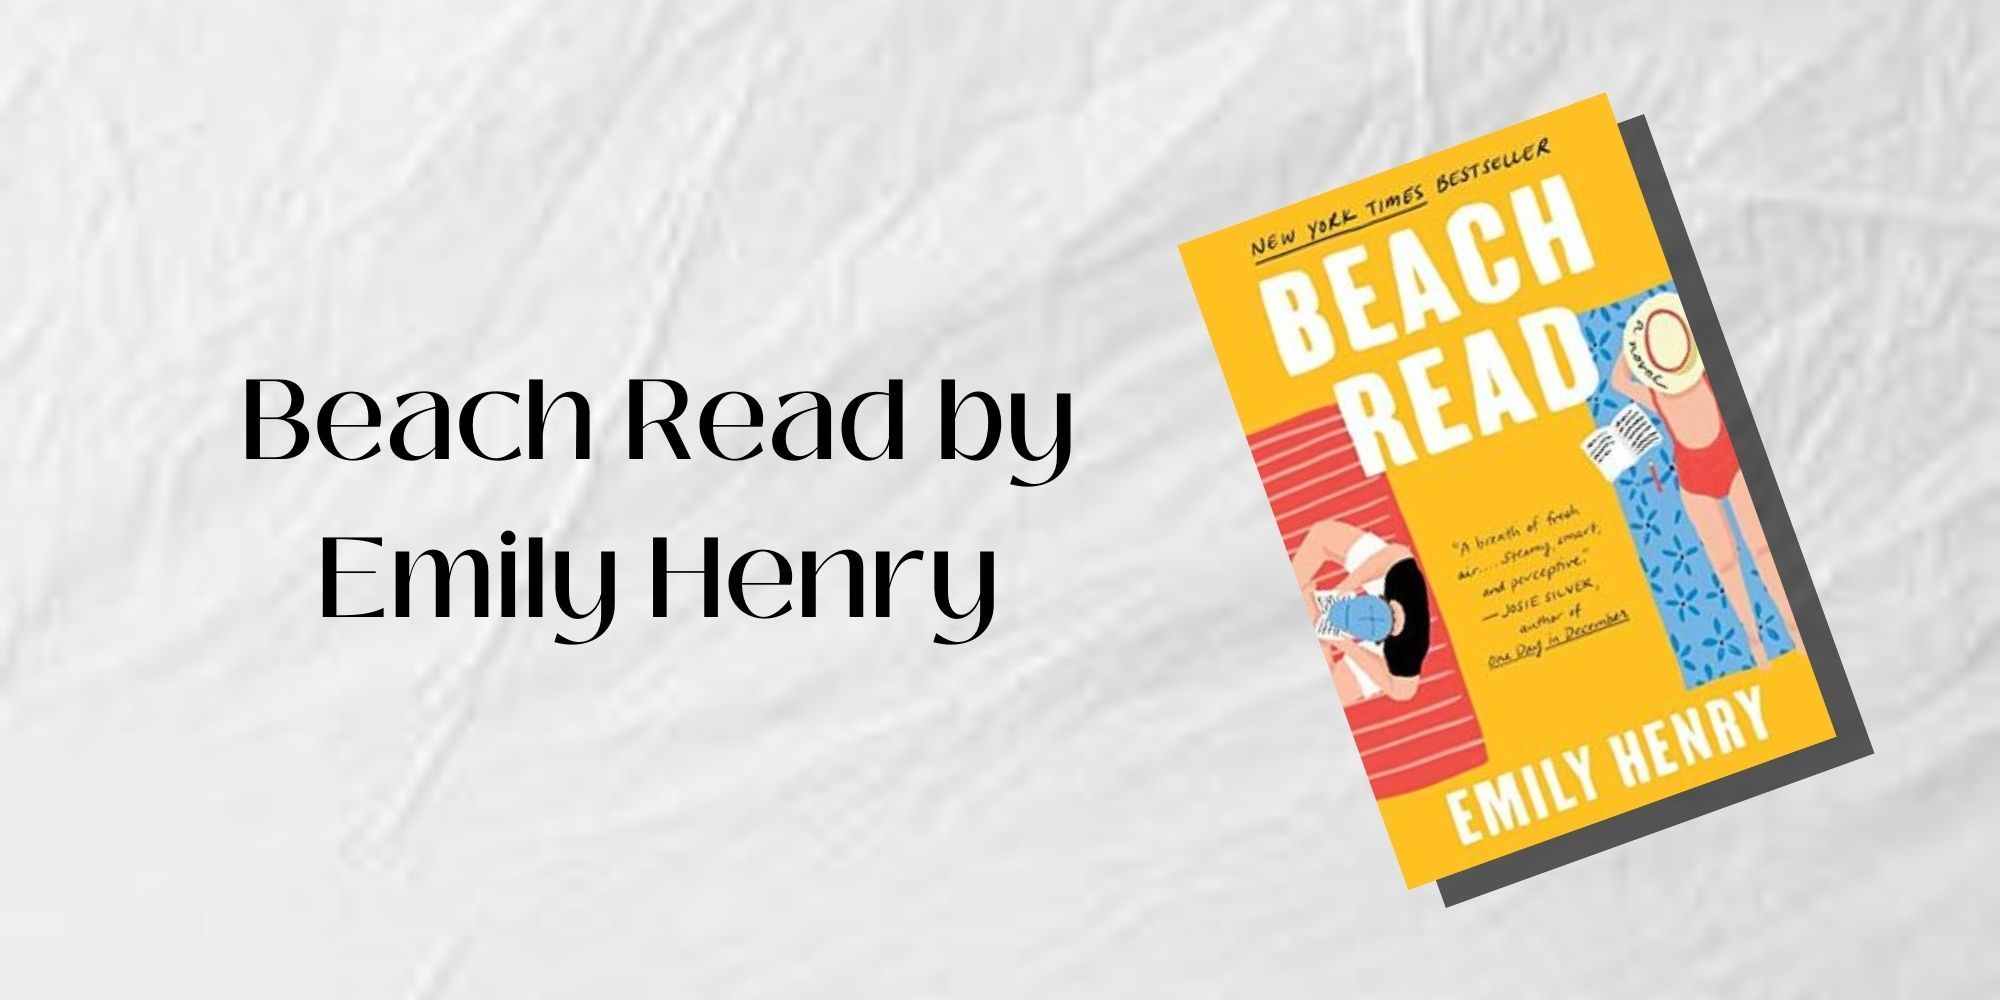 The Cover of Beach Read by Emily Henry